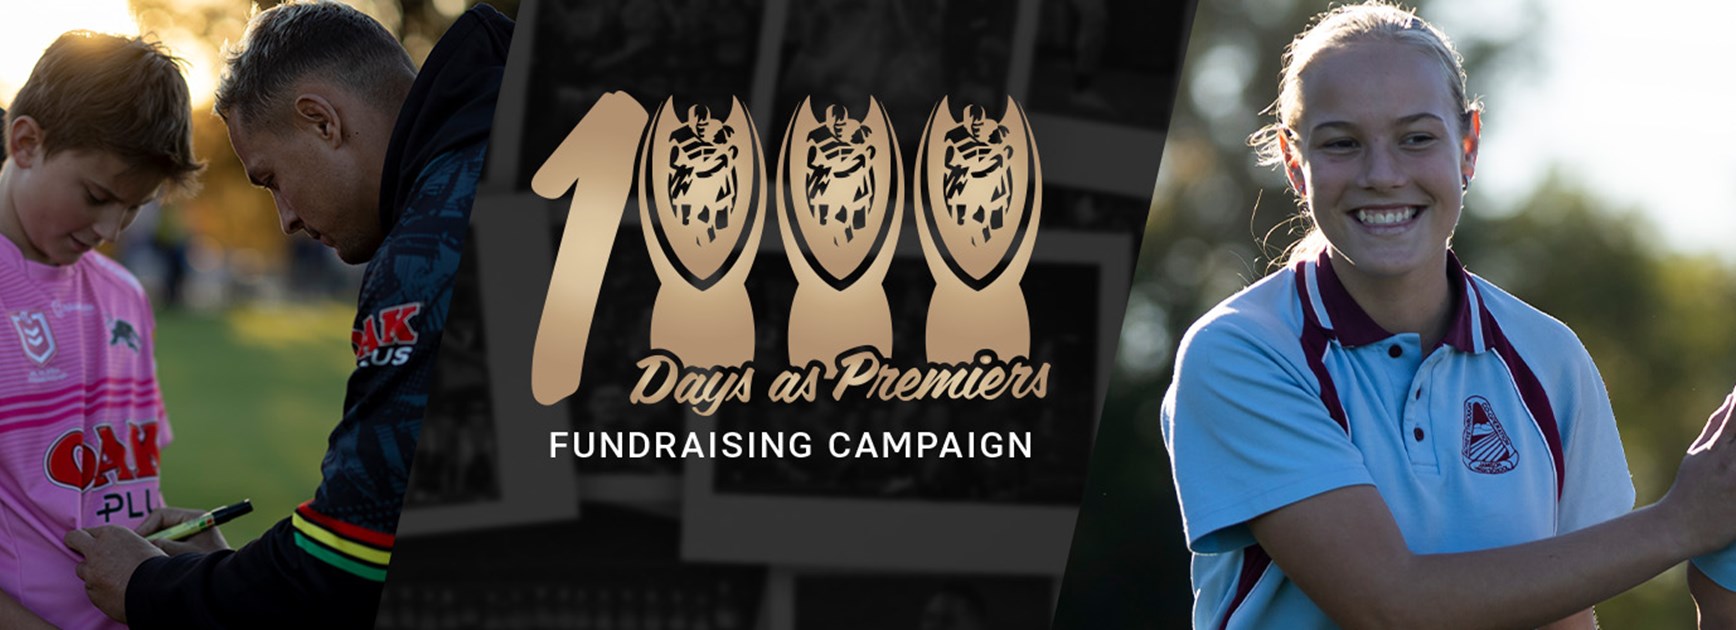 1,000 Days as Premiers donors to complete lap of honour